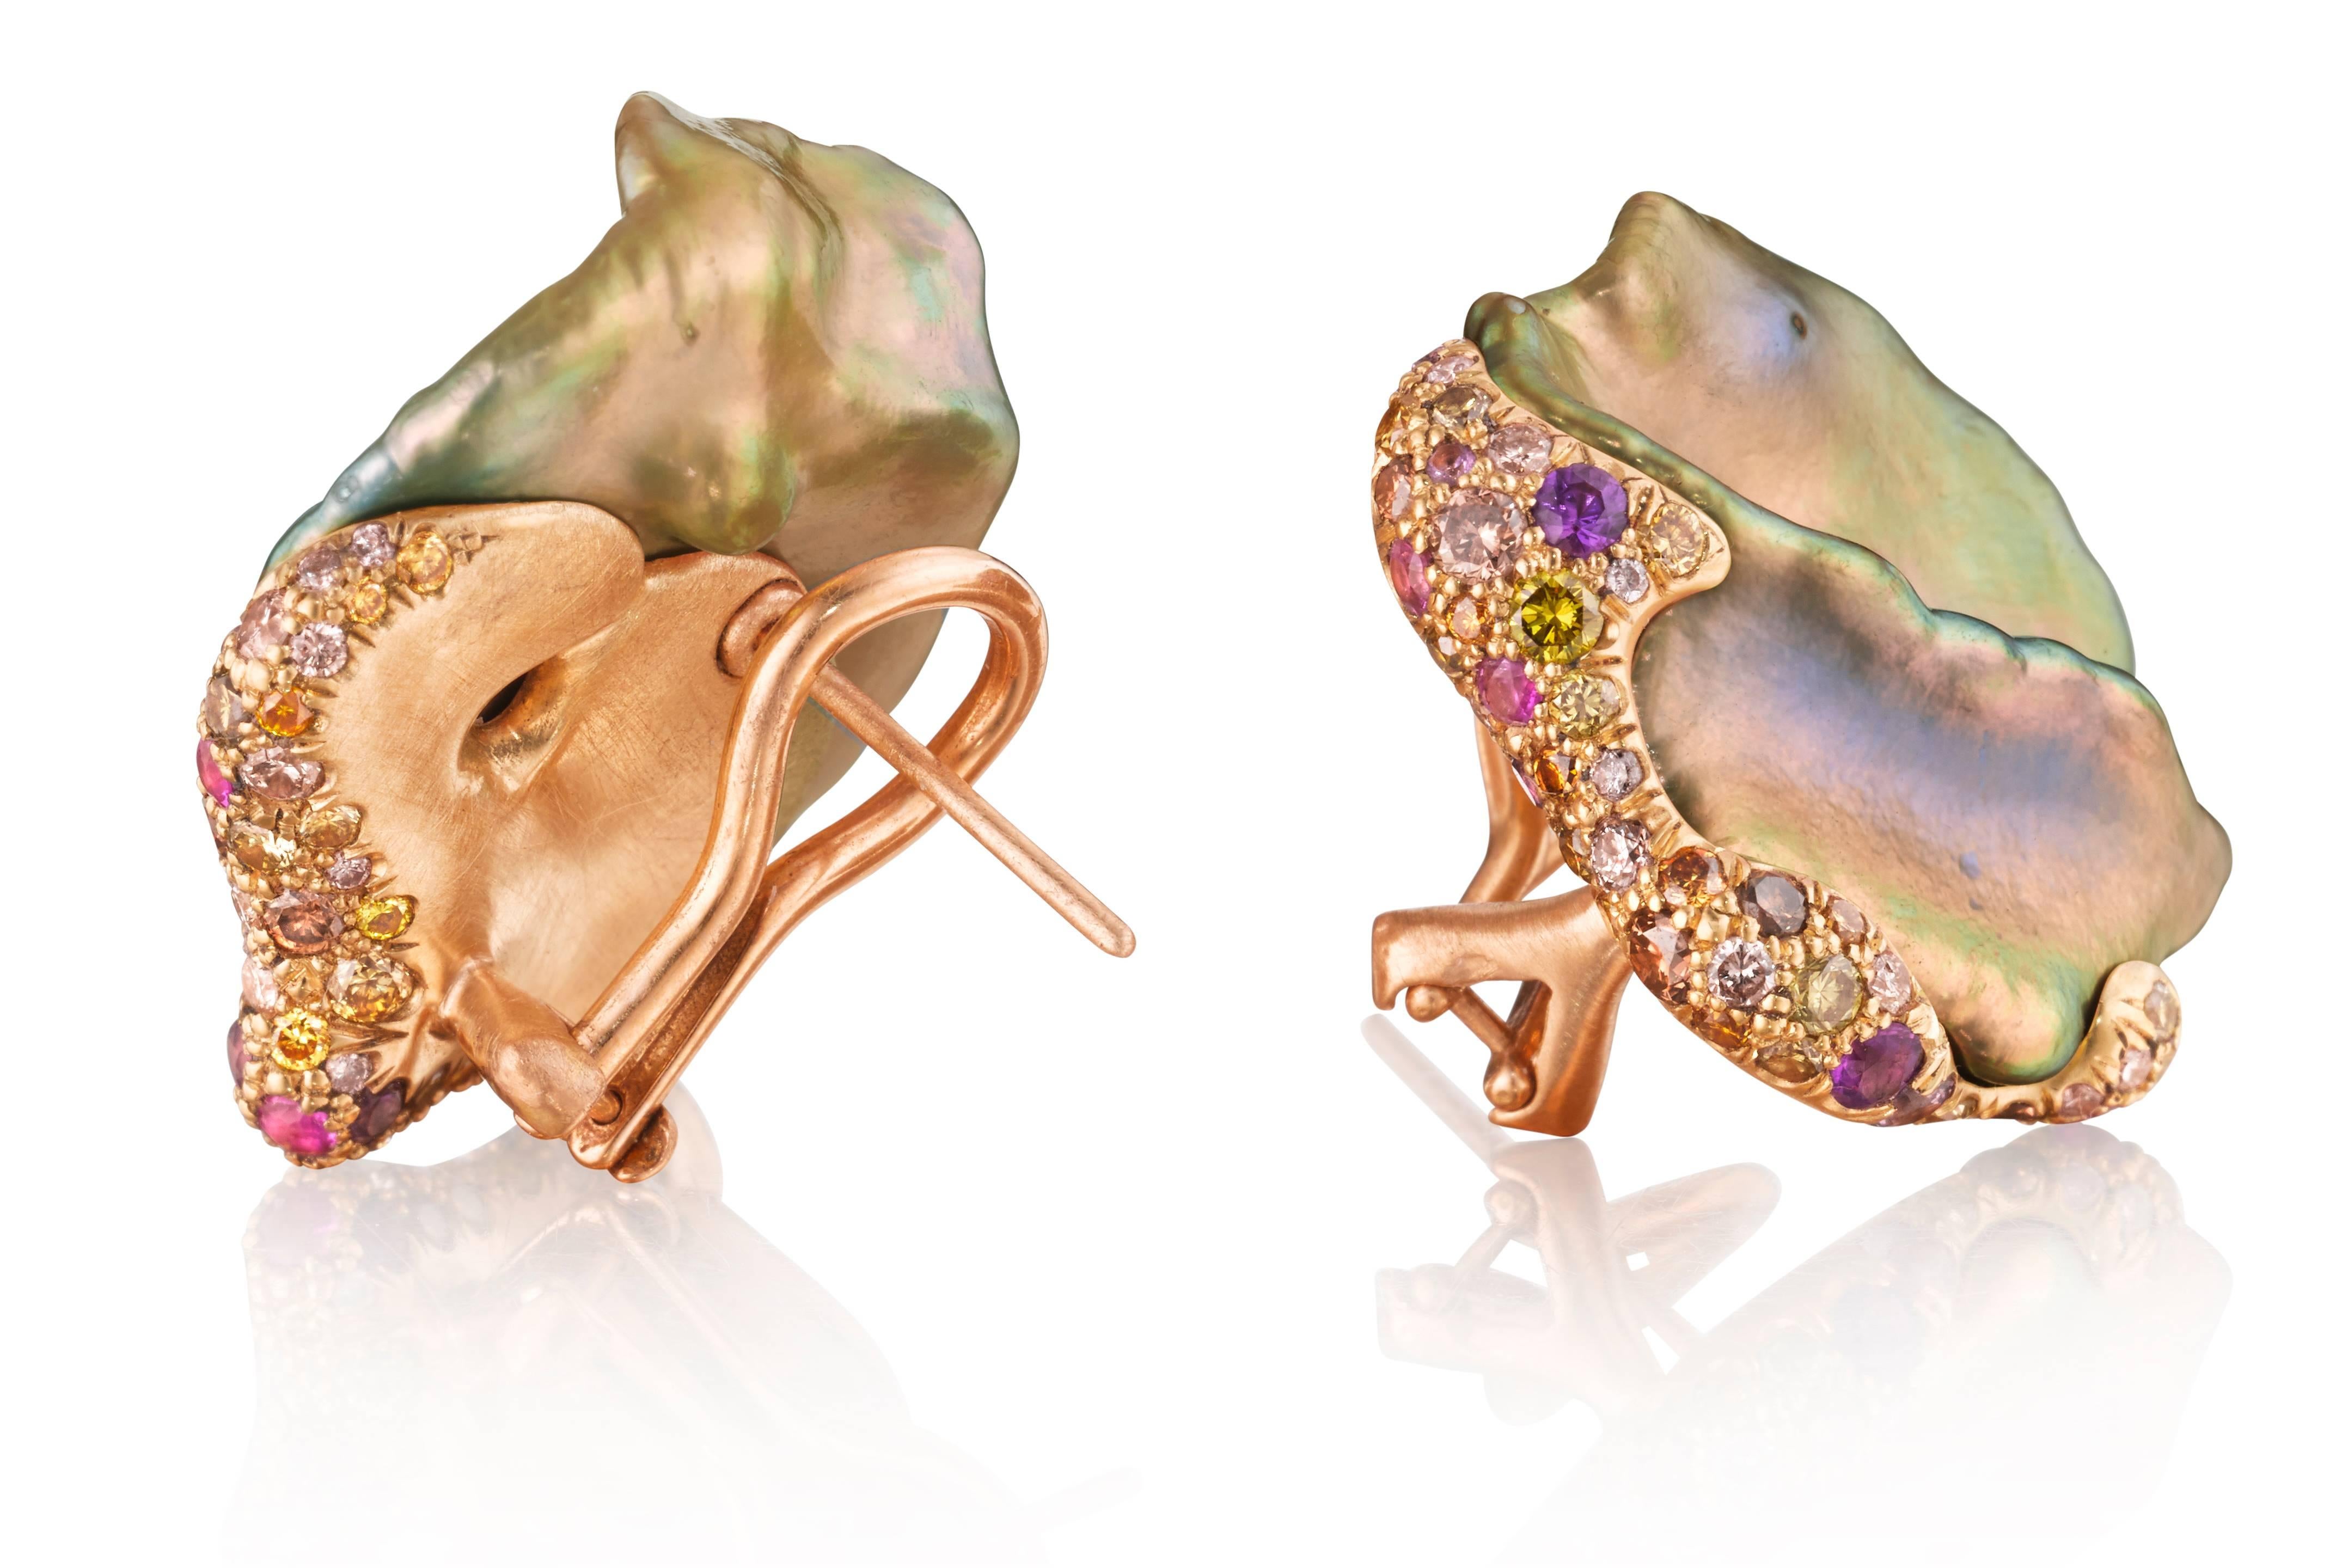 Natural color Chinese freshwater pearl earrings set in 18K yellow gold with 
multicolored diamonds, sapphires and amethysts.

Internationally award winning designer Naomi Sarna creates gem carvings and jewels of unusual beauty. She is represented